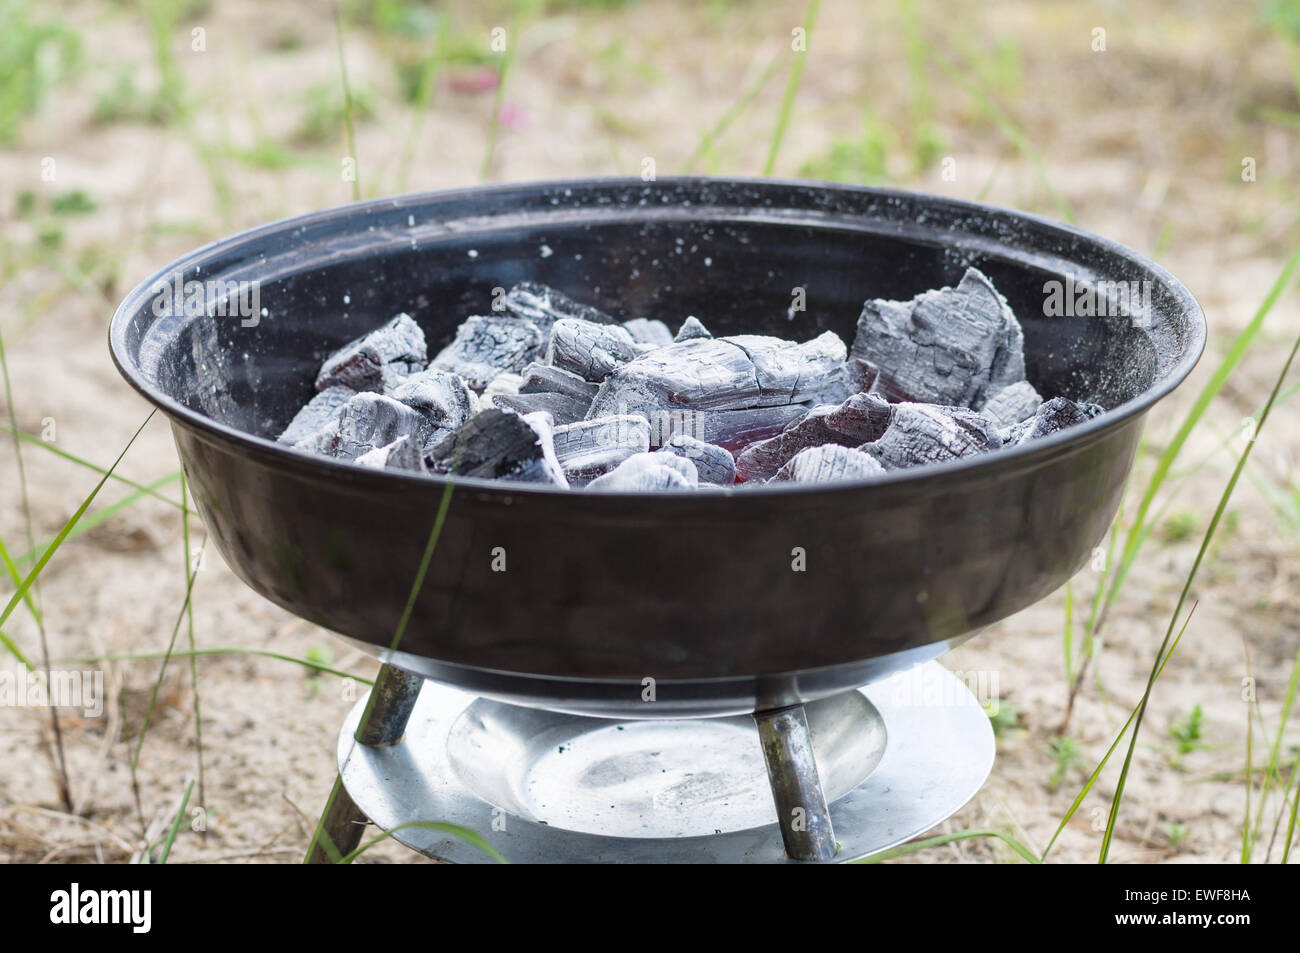 Charcoal Briquets 101 - Girls Can Grill